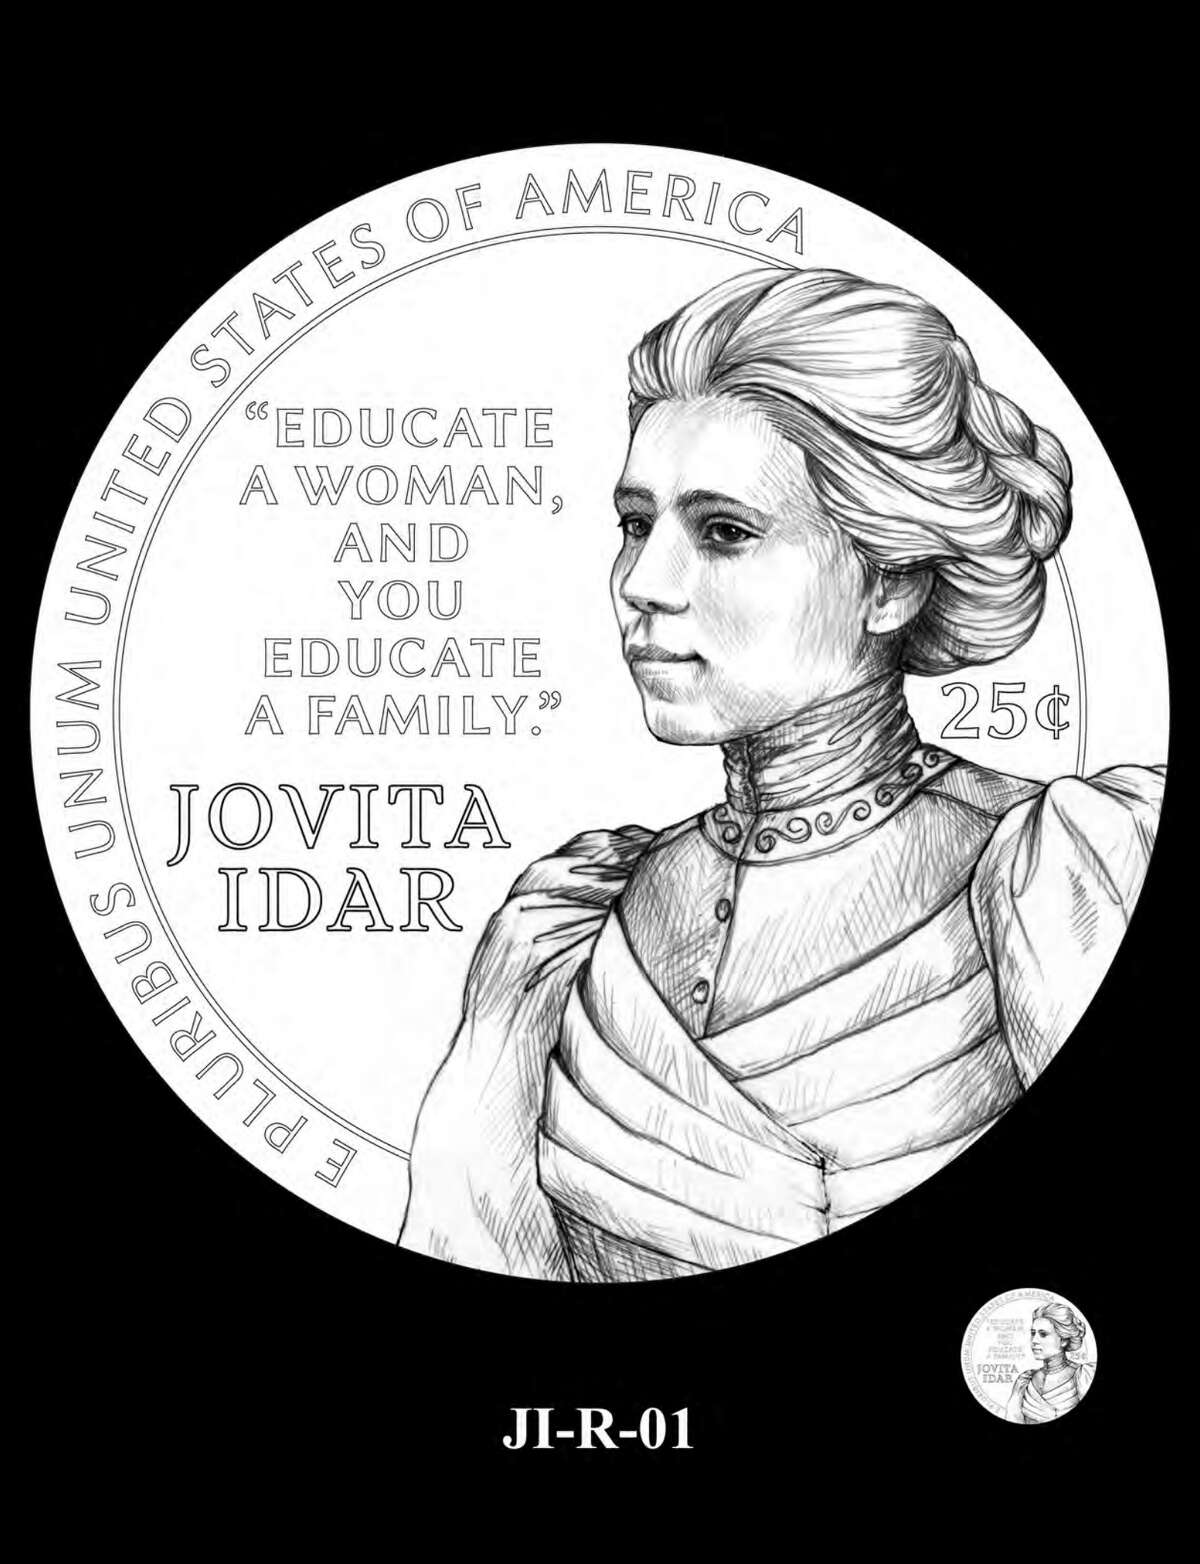 These designs released by the U.S. Mint show the wide variety of designs originally proposed for the Jovita Idar quarter being released by the Mint in 2023. 